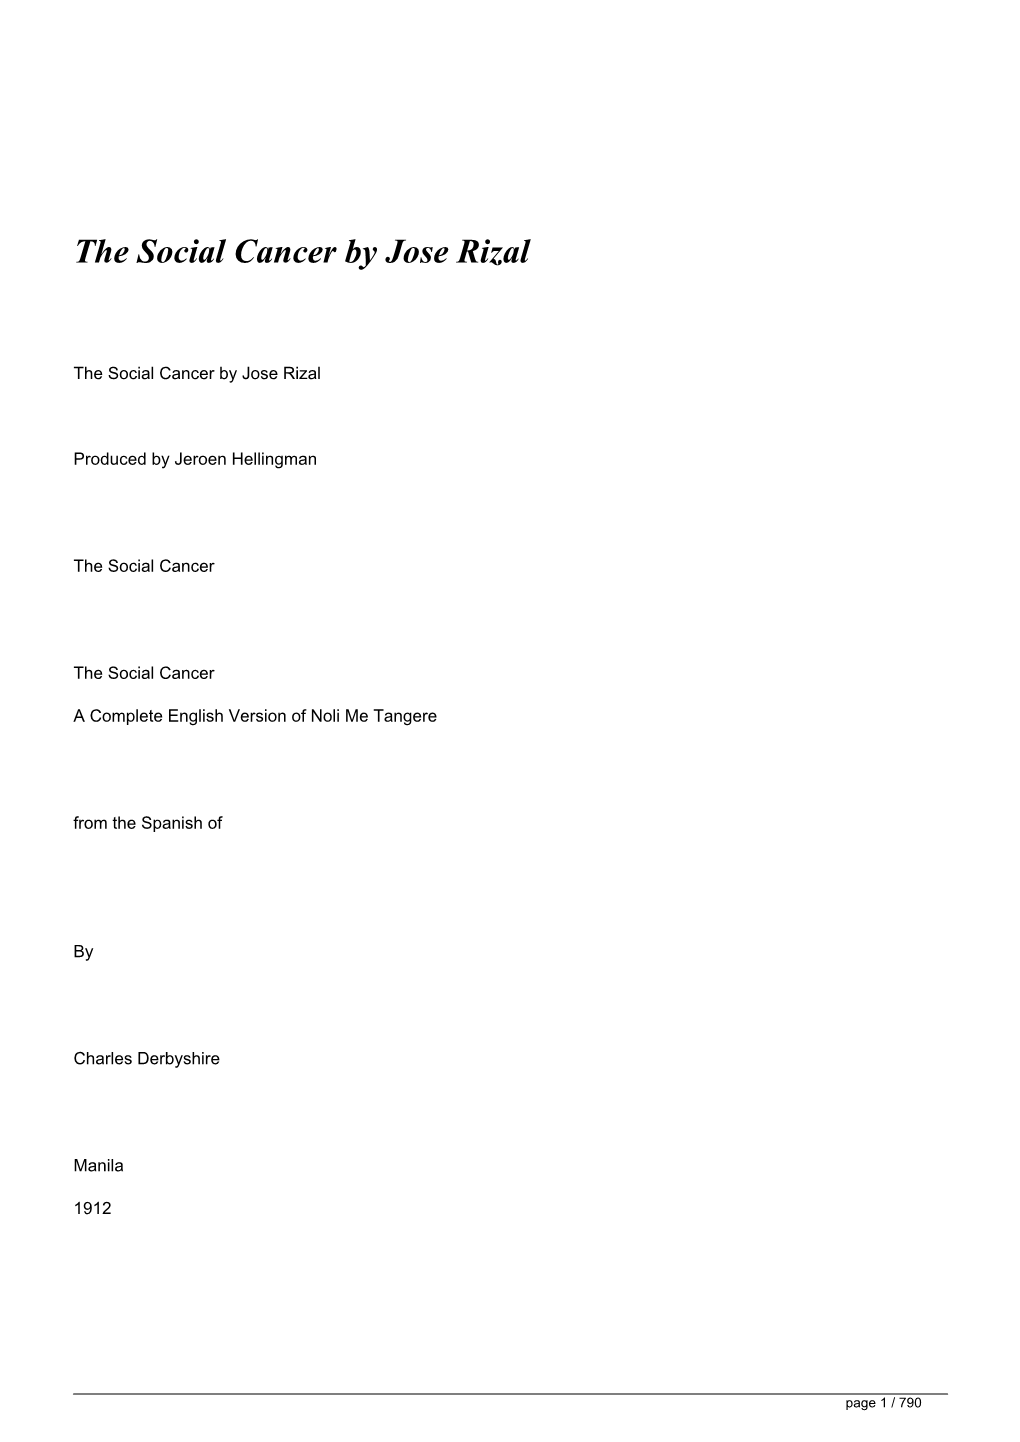 The Social Cancer by Jose Rizal&lt;/H1&gt;